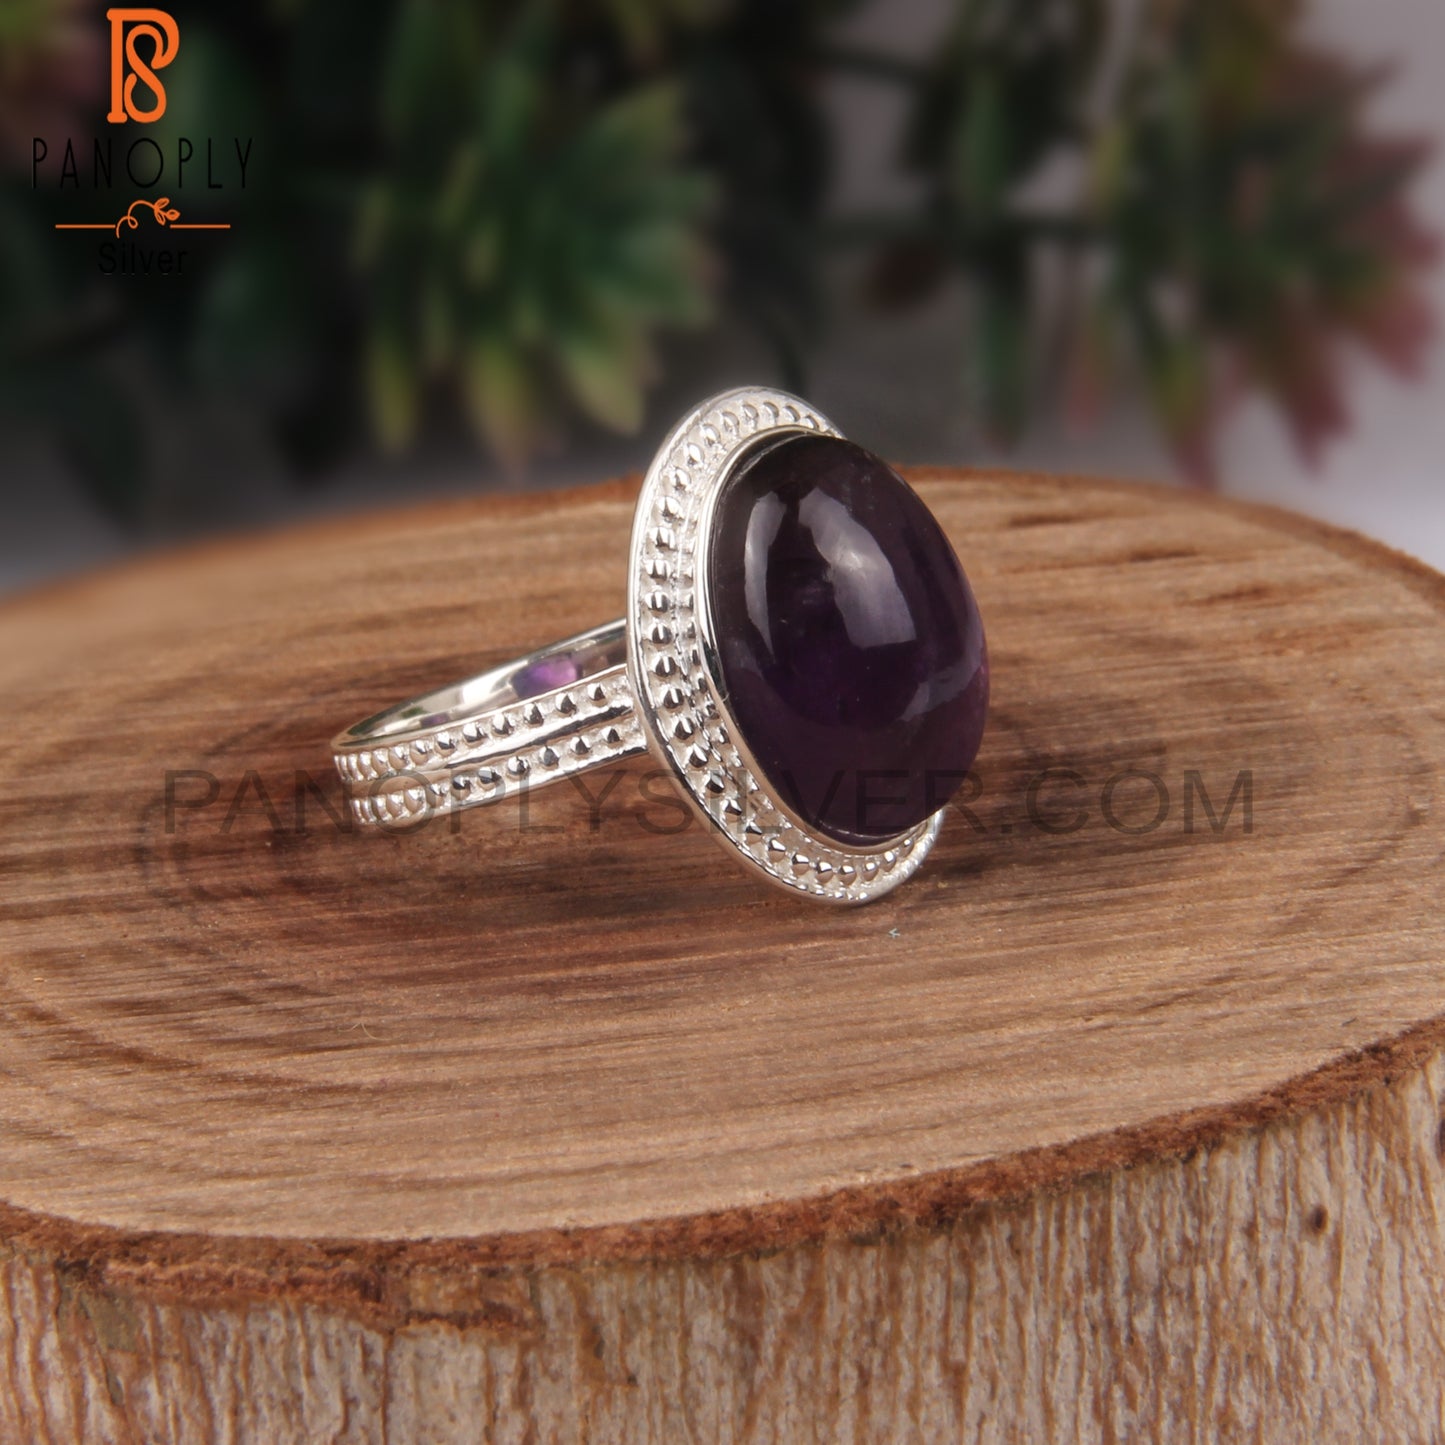 Oval Shape Amethyst Sterling Silver 925 Stamp Aesthetic Ring